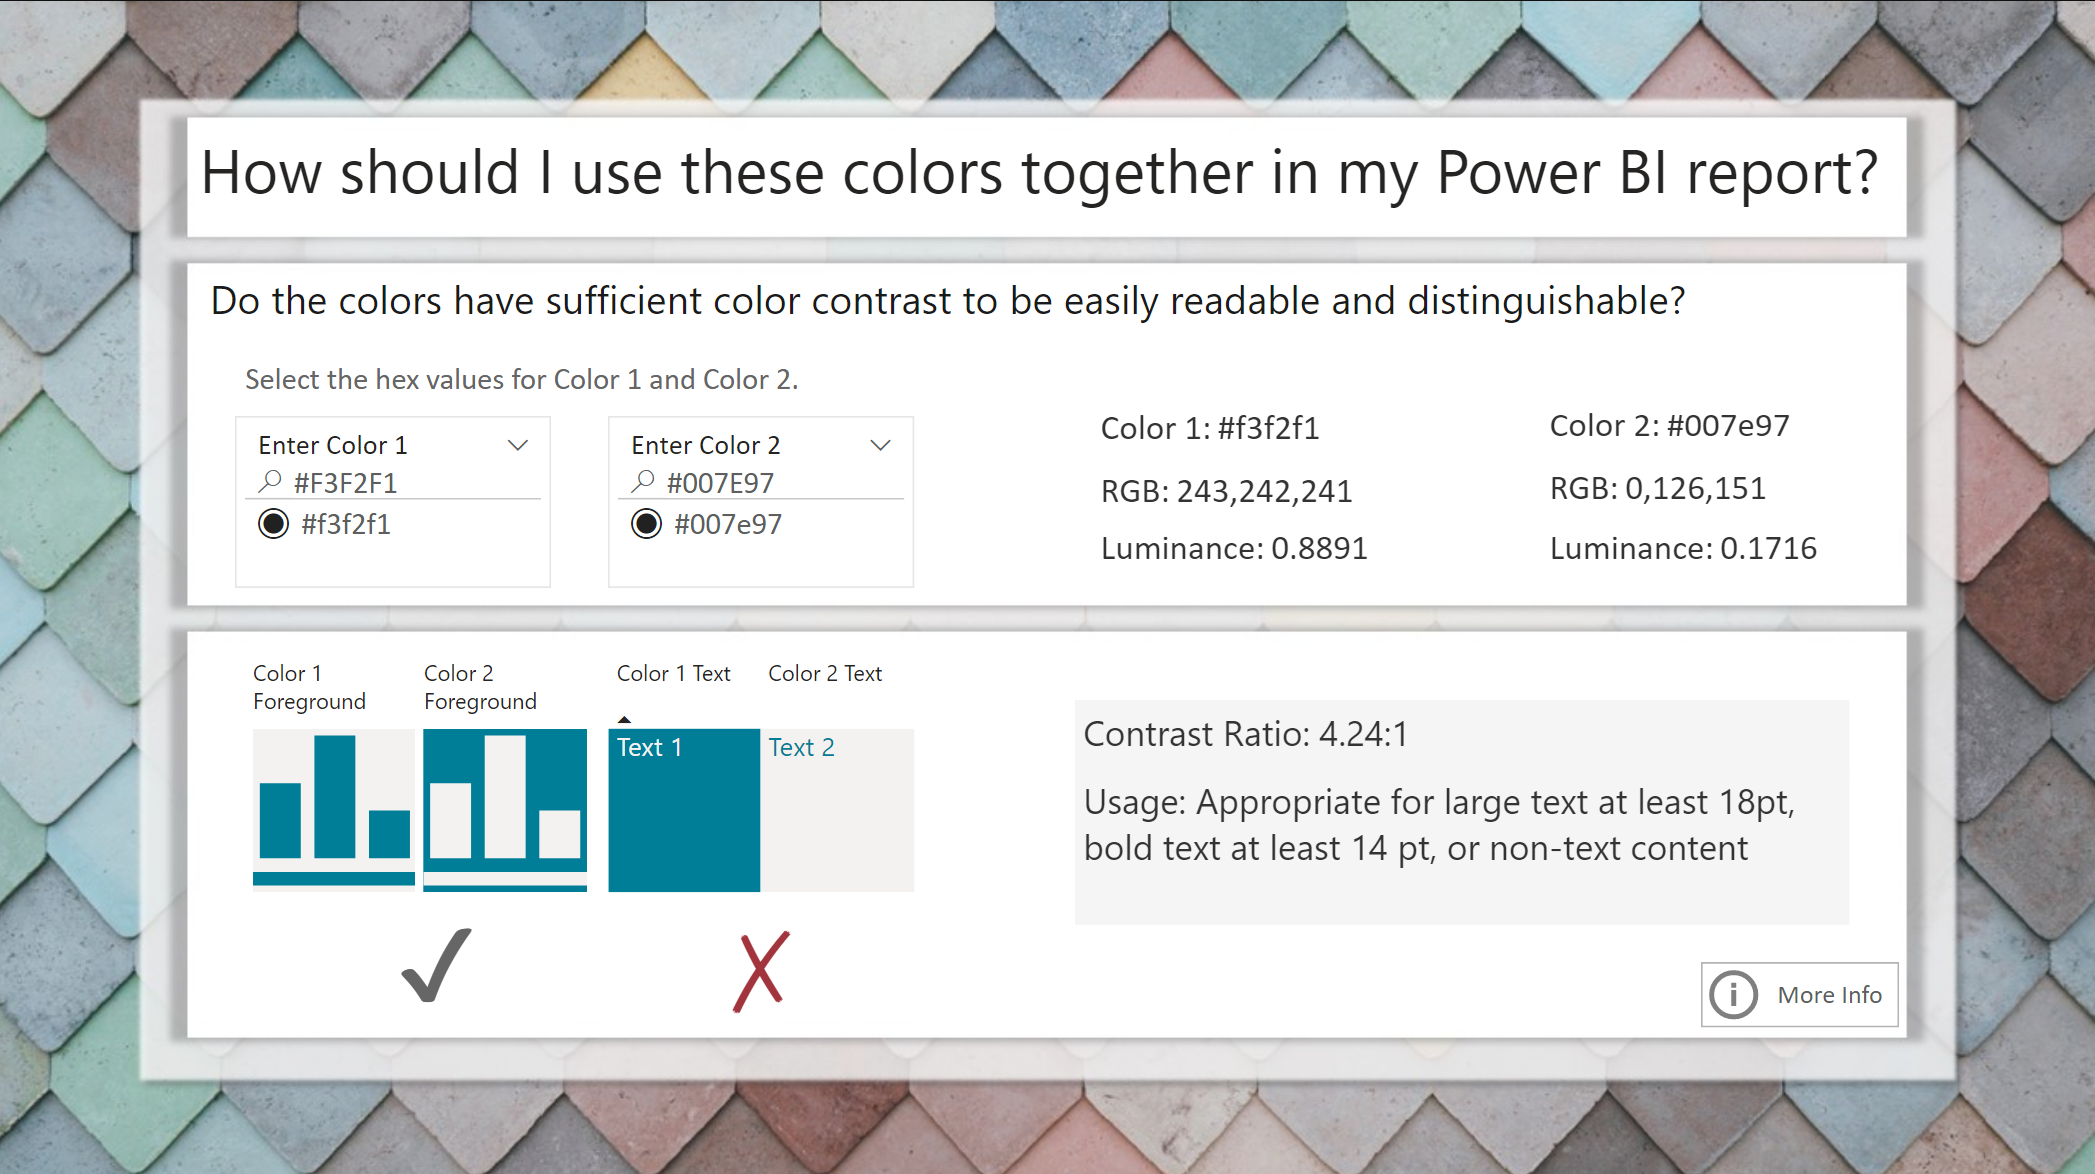 A power bi report that calculates contrast ratio between two colors